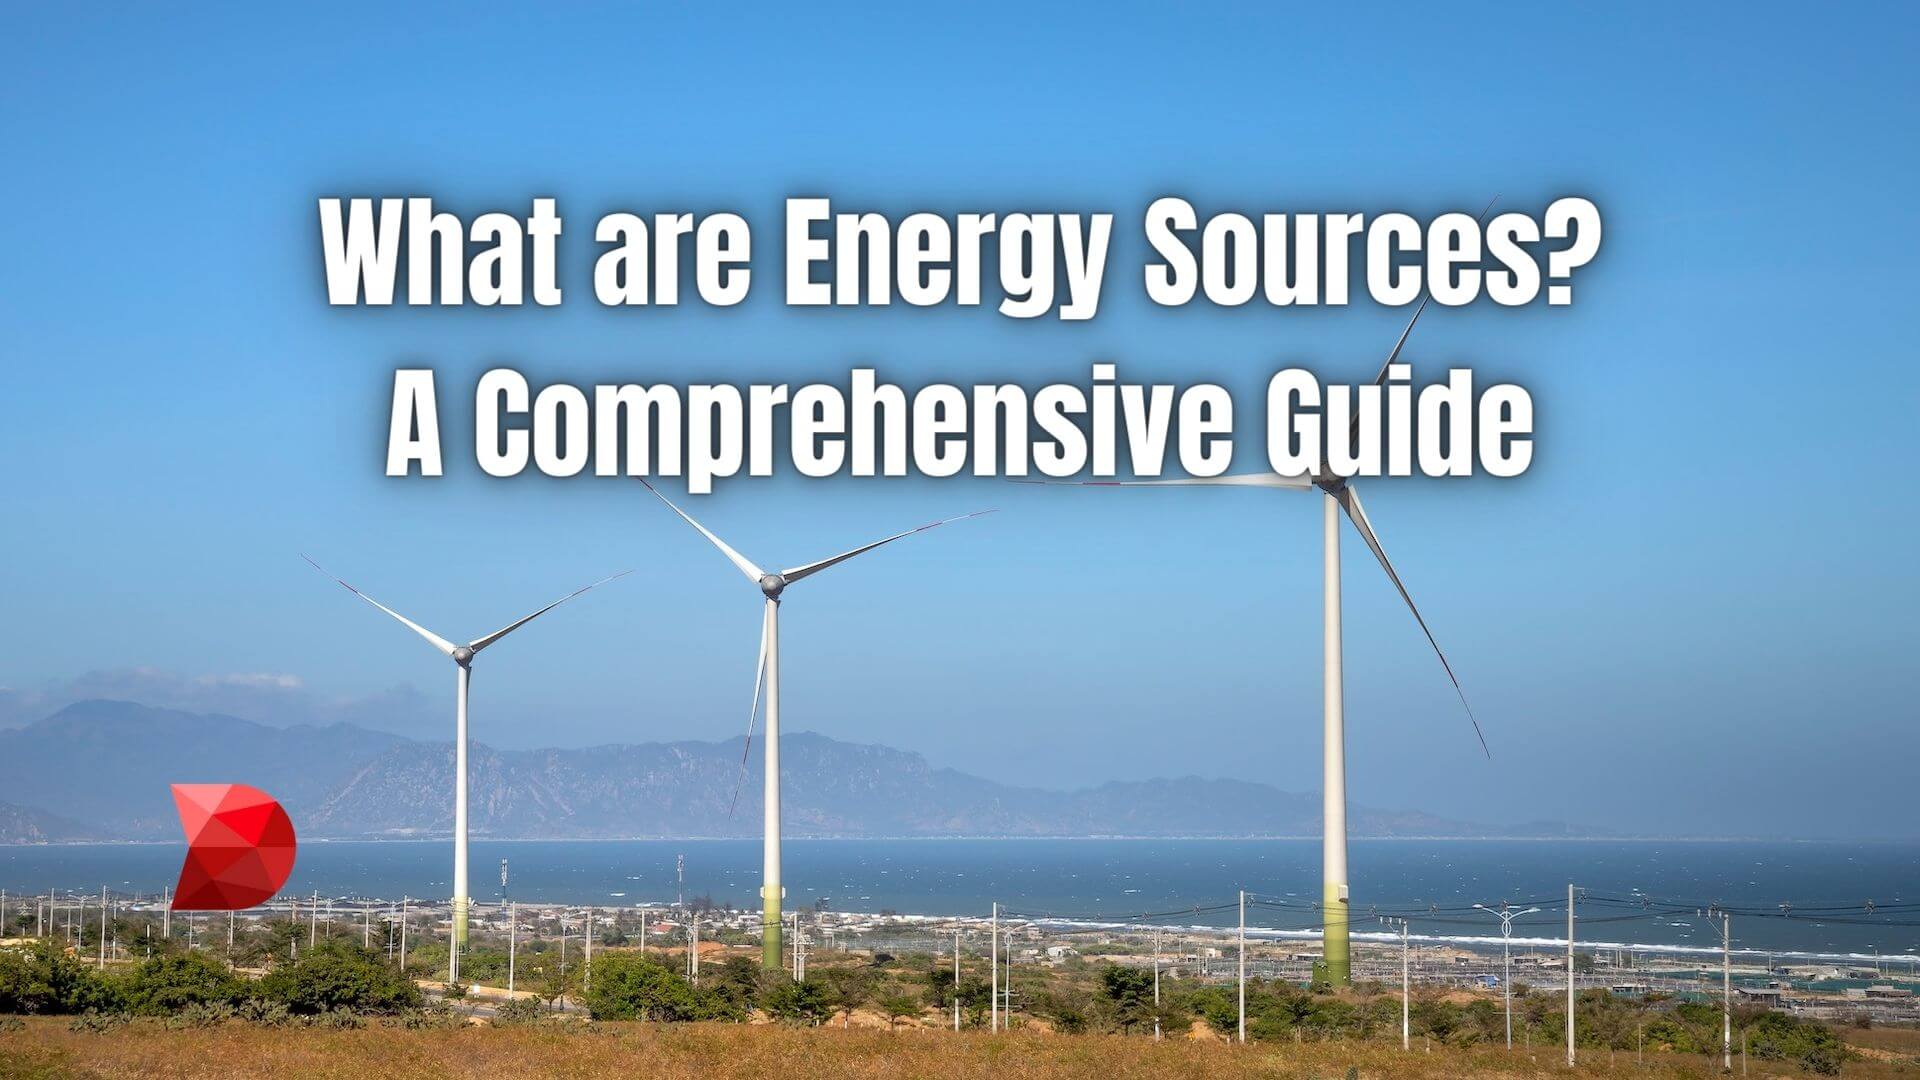 Energy sources are the means of producing energy through natural processes or technological advances. Here are the types of energy sources.